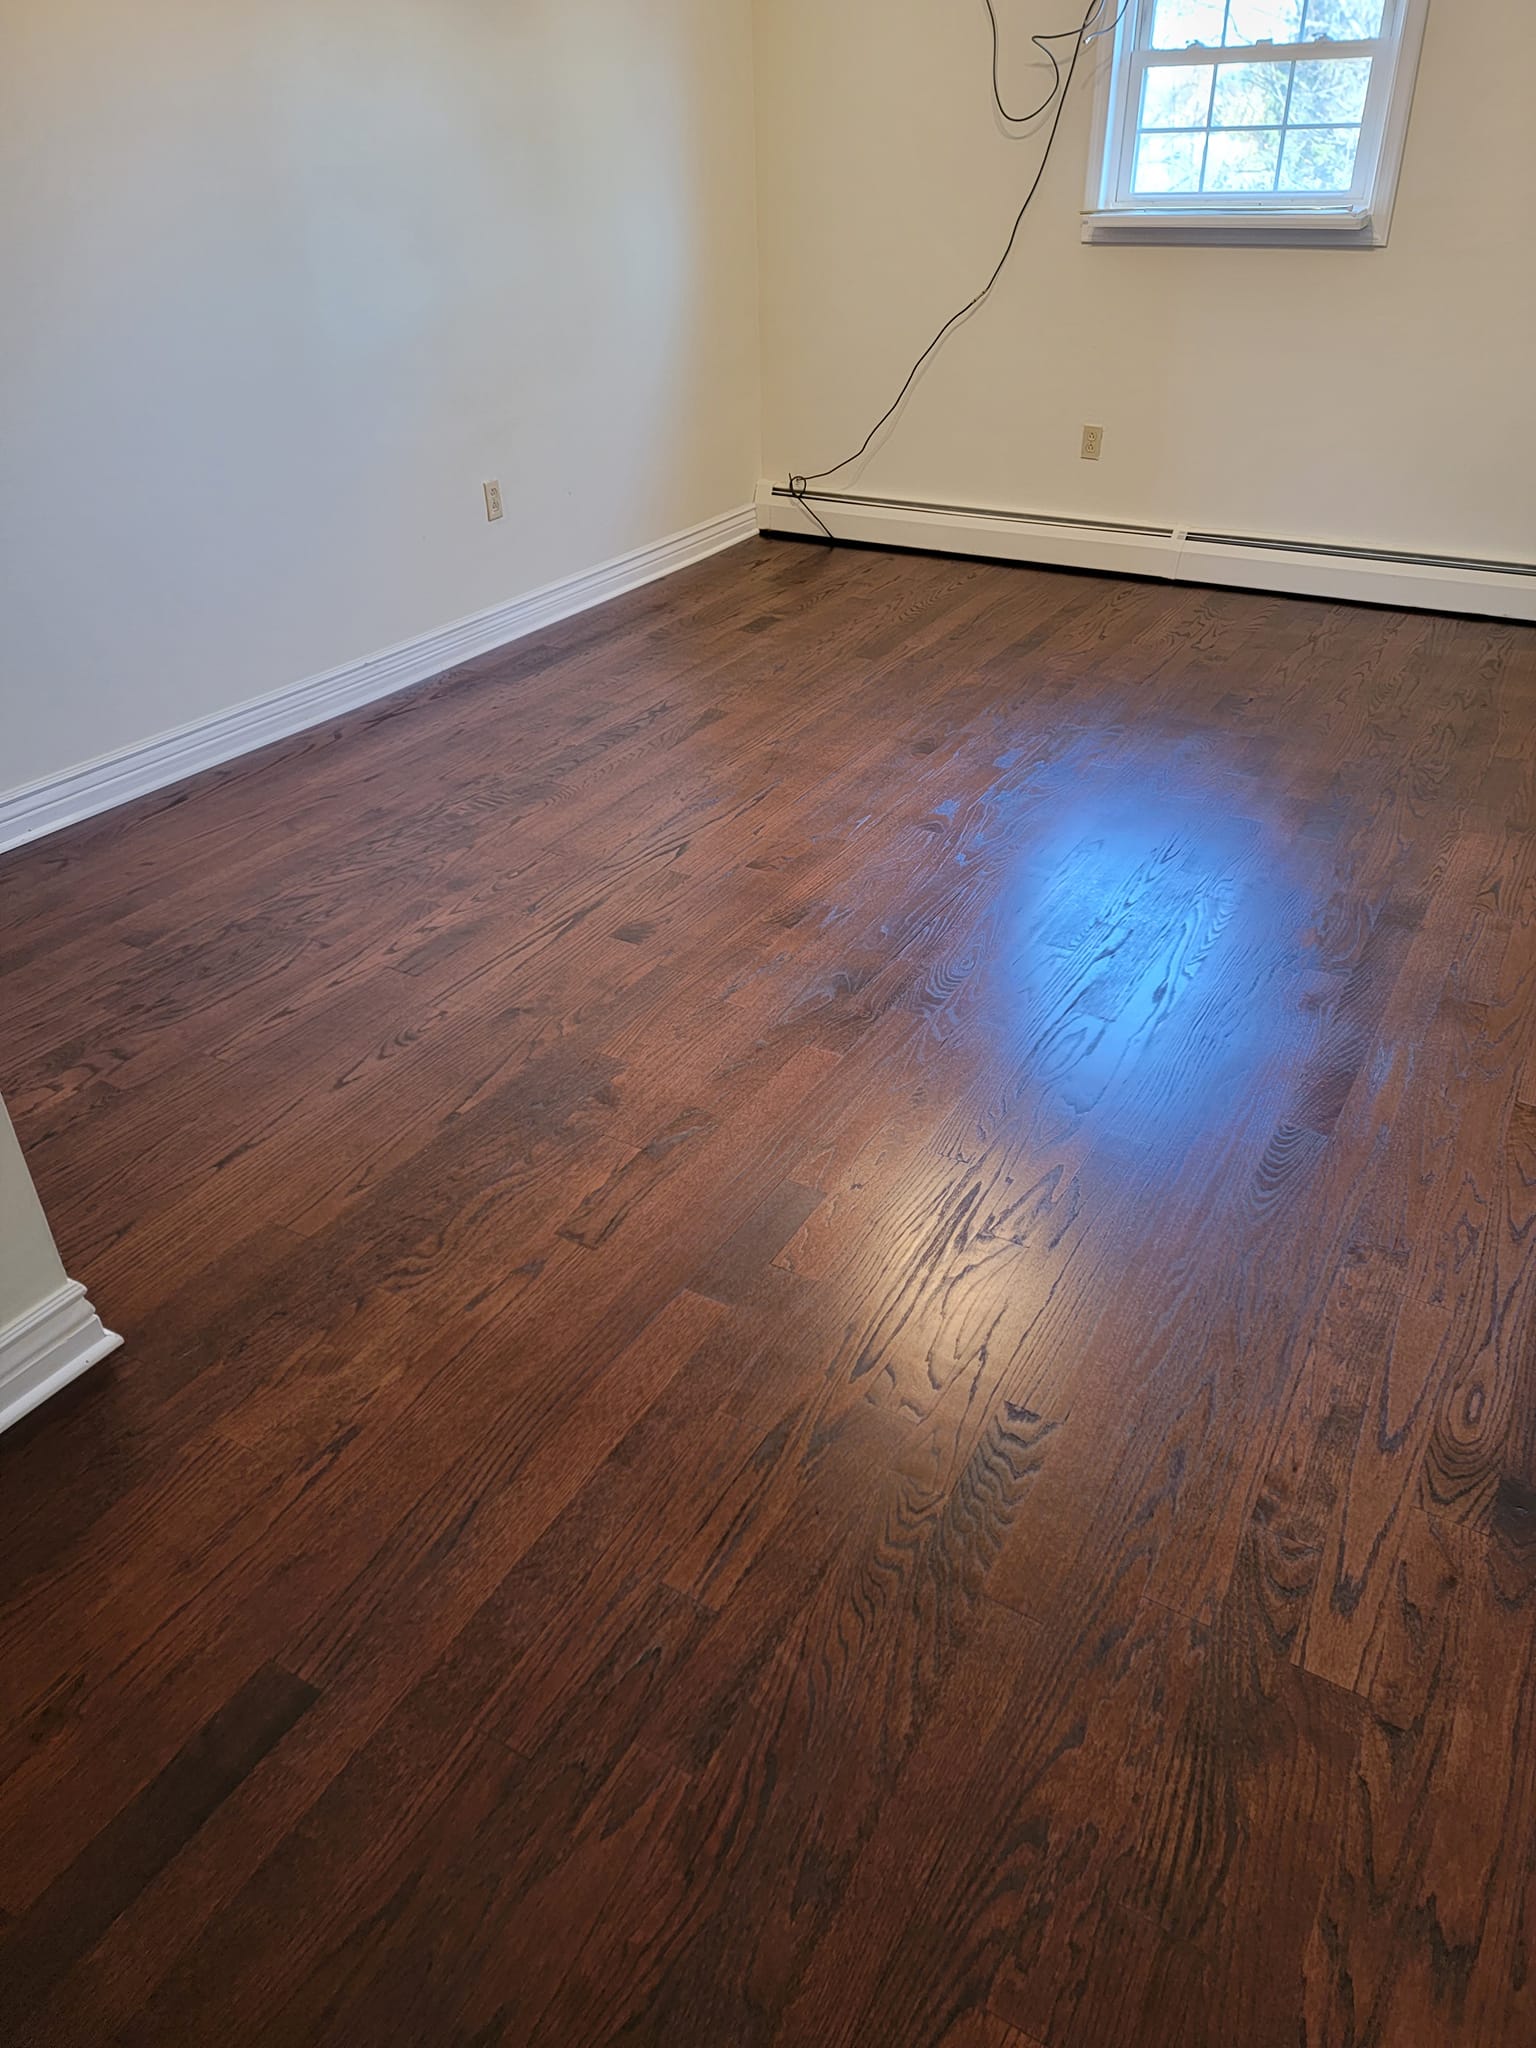 Tailored Flooring Installations: Your Unique Style, Our Expert Craftsmanship